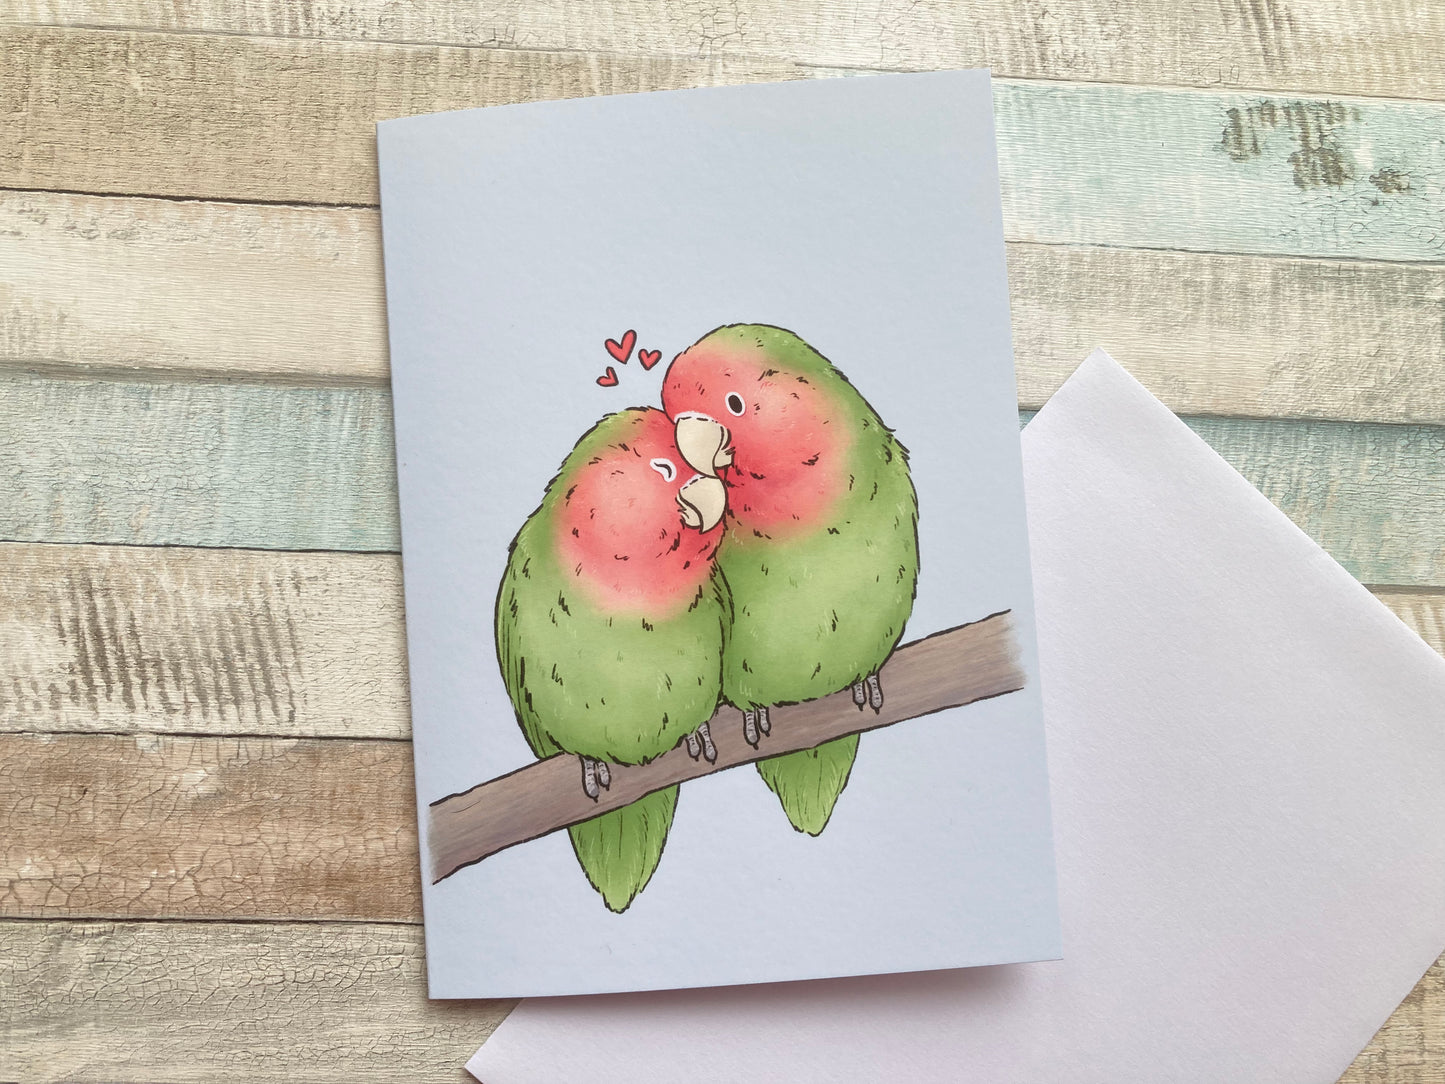 Lovebird Greeting Card, A6 Size, Couples card, blank greeting card, with white envelope, blue background, parrot love illustration